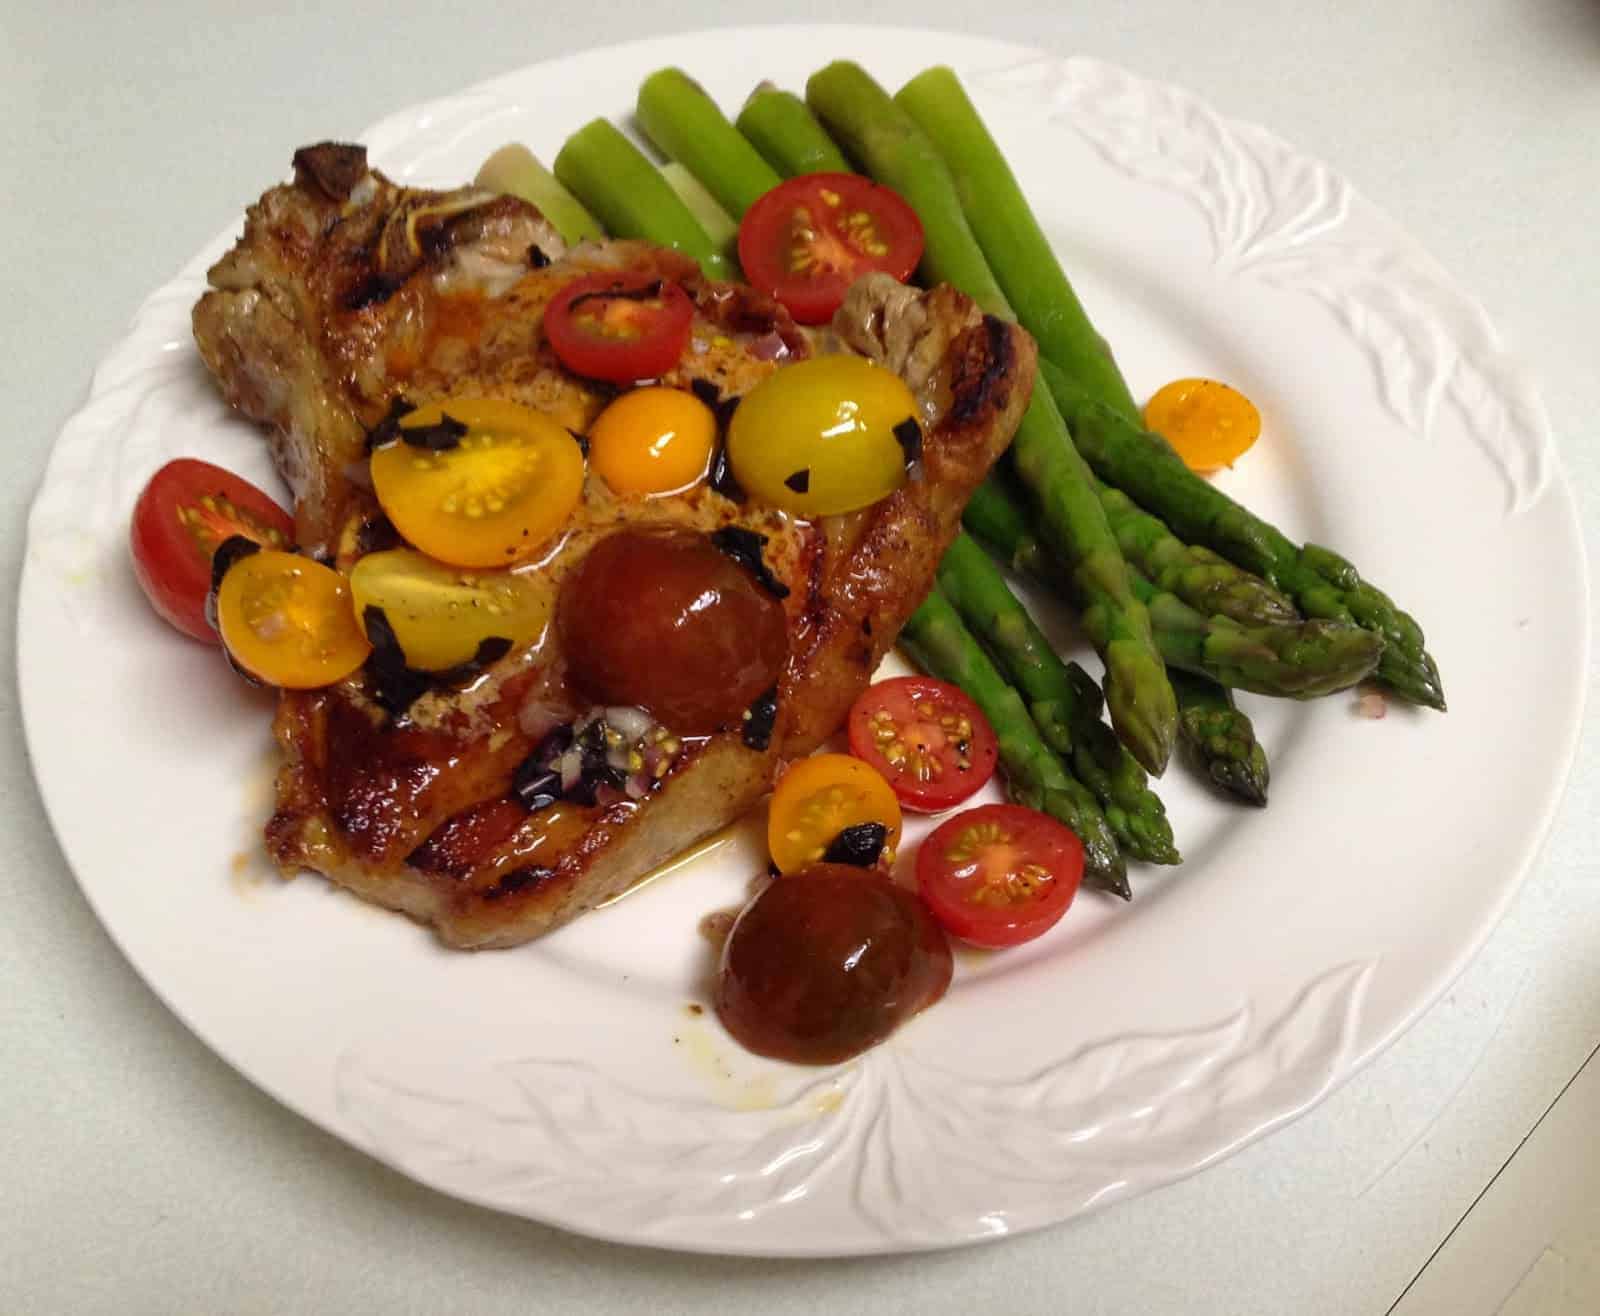 Pan-Grilled Veal Chops with Tomato-Blue Cheese Butter and Cherry Tomato Salad from Bruce Aidells’ "The Great Meat Cookbook"